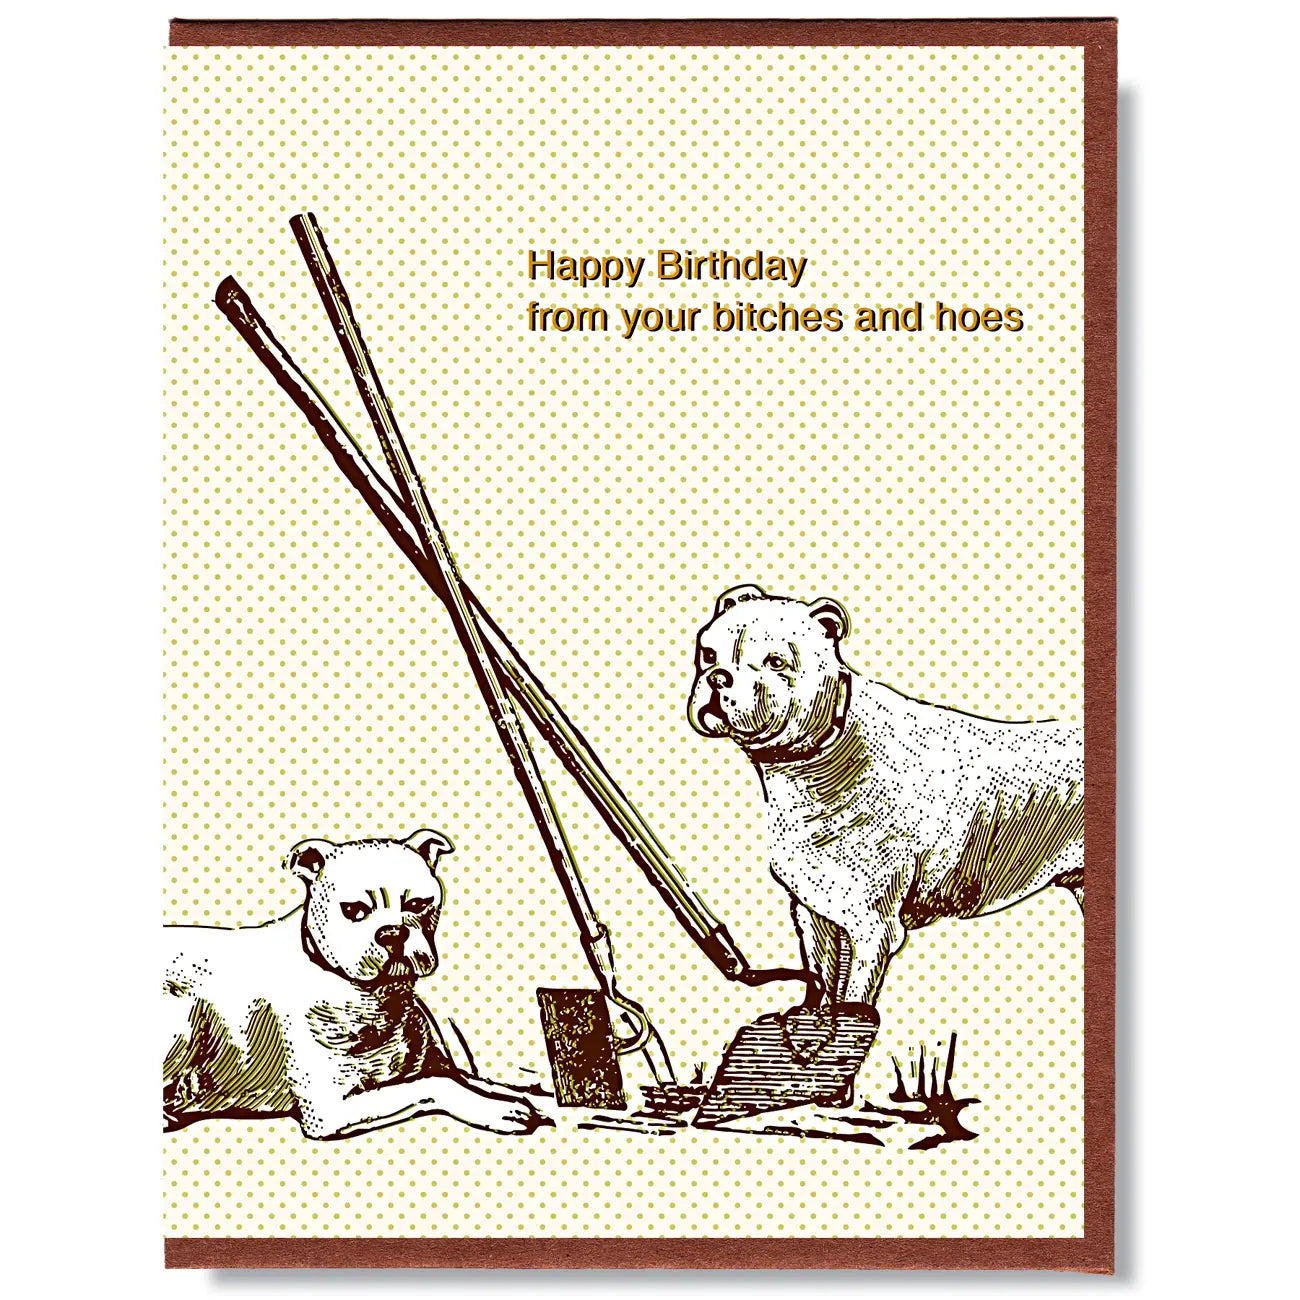 Bitches & Hoes Birthday Card